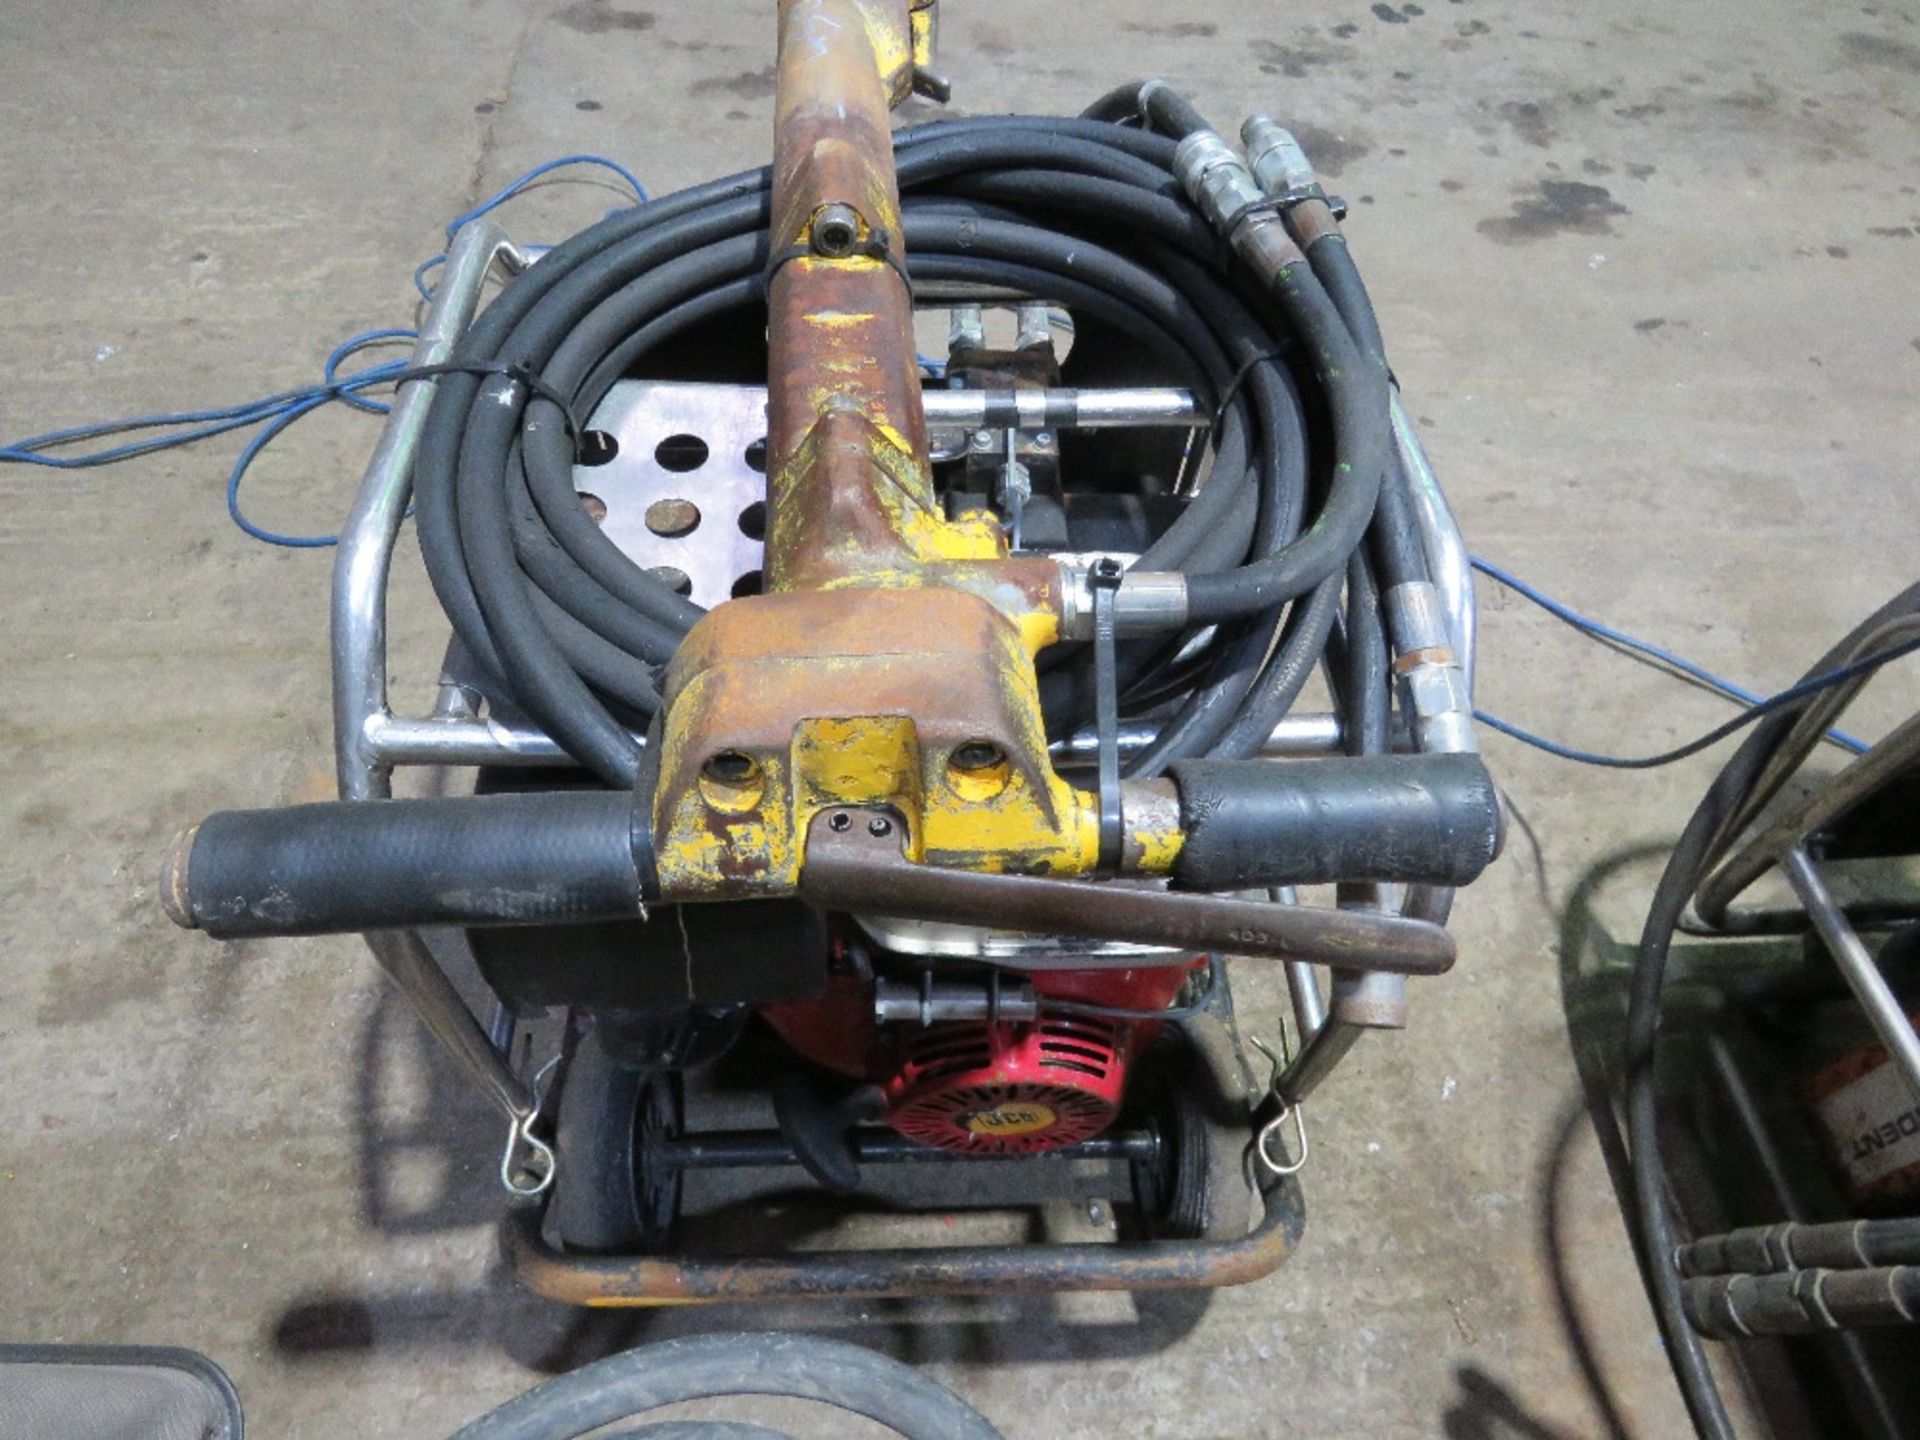 JCB HYDRAULIC BREAKER PACK WITH HOSE AND GUN. - Image 4 of 4